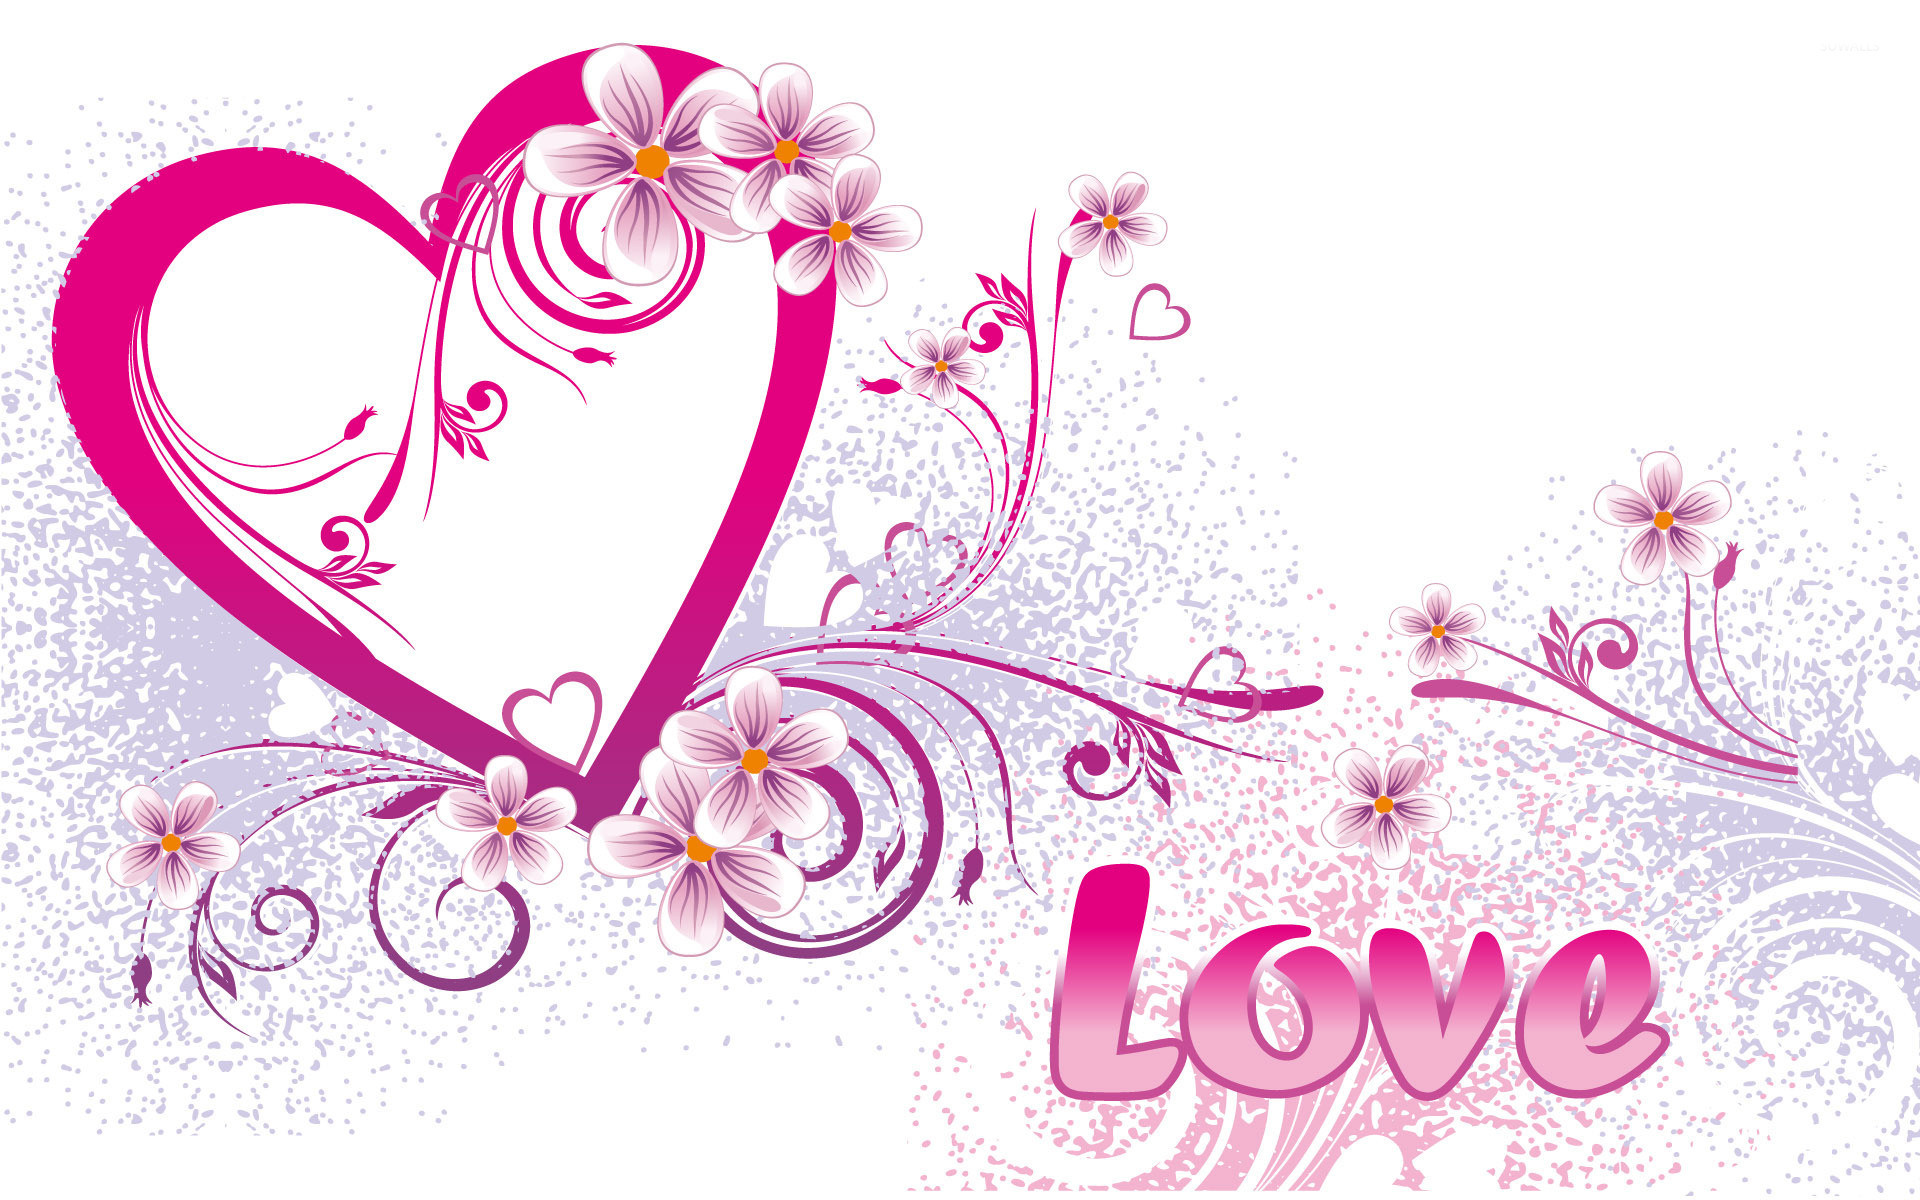 Love and pink heart wallpaper